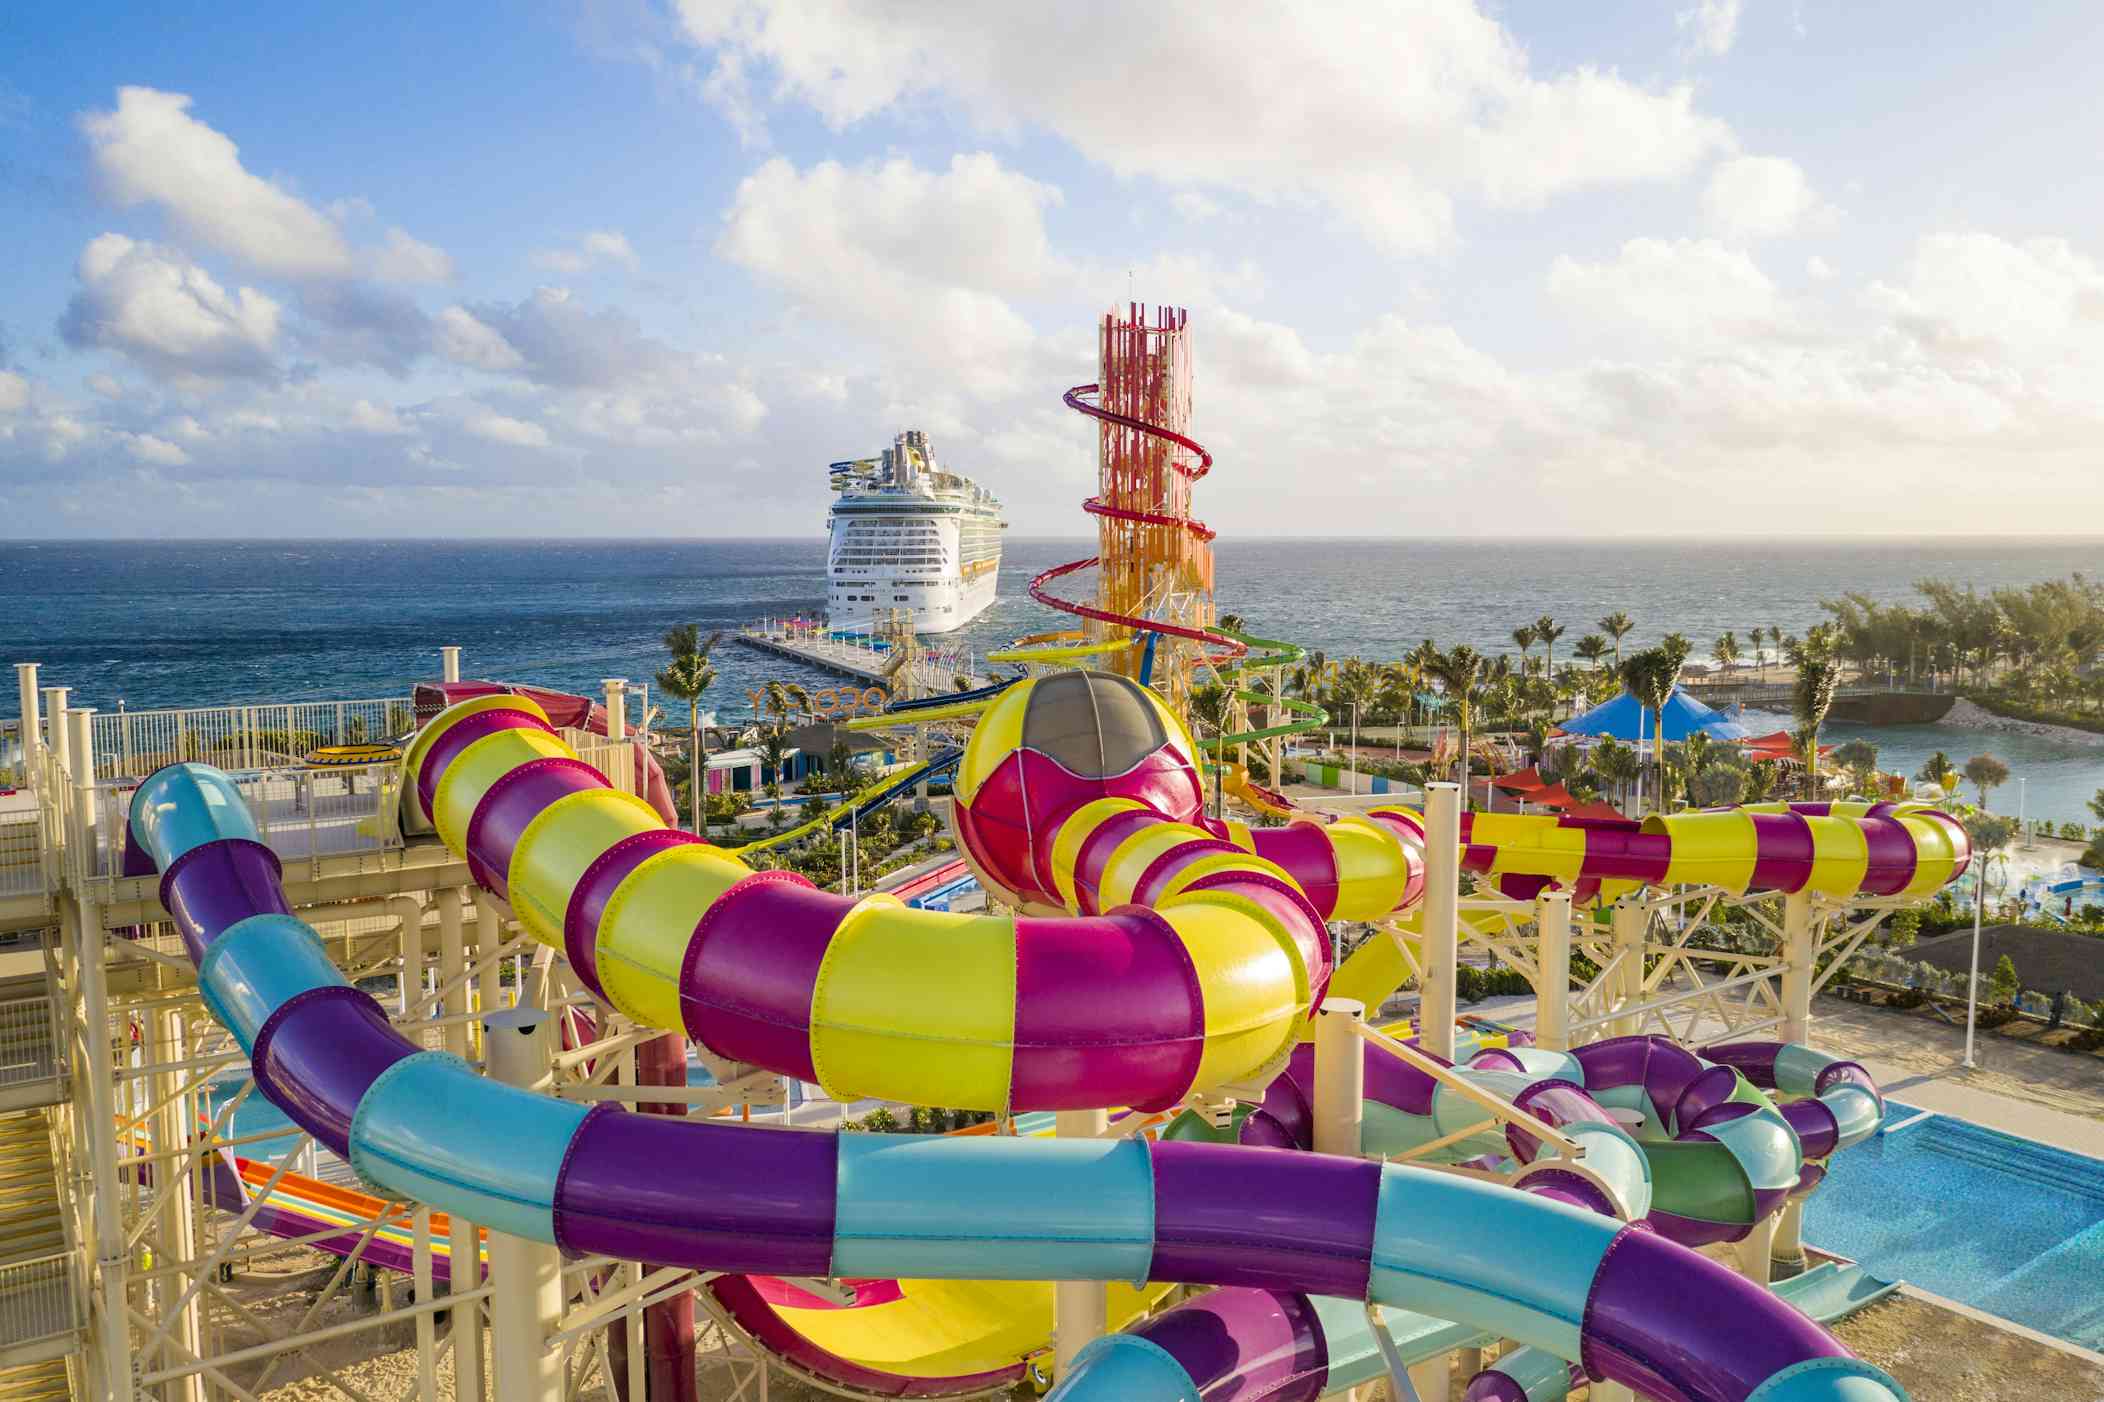 What To Expect On Your First Royal Caribbean Cruise - KidTripster